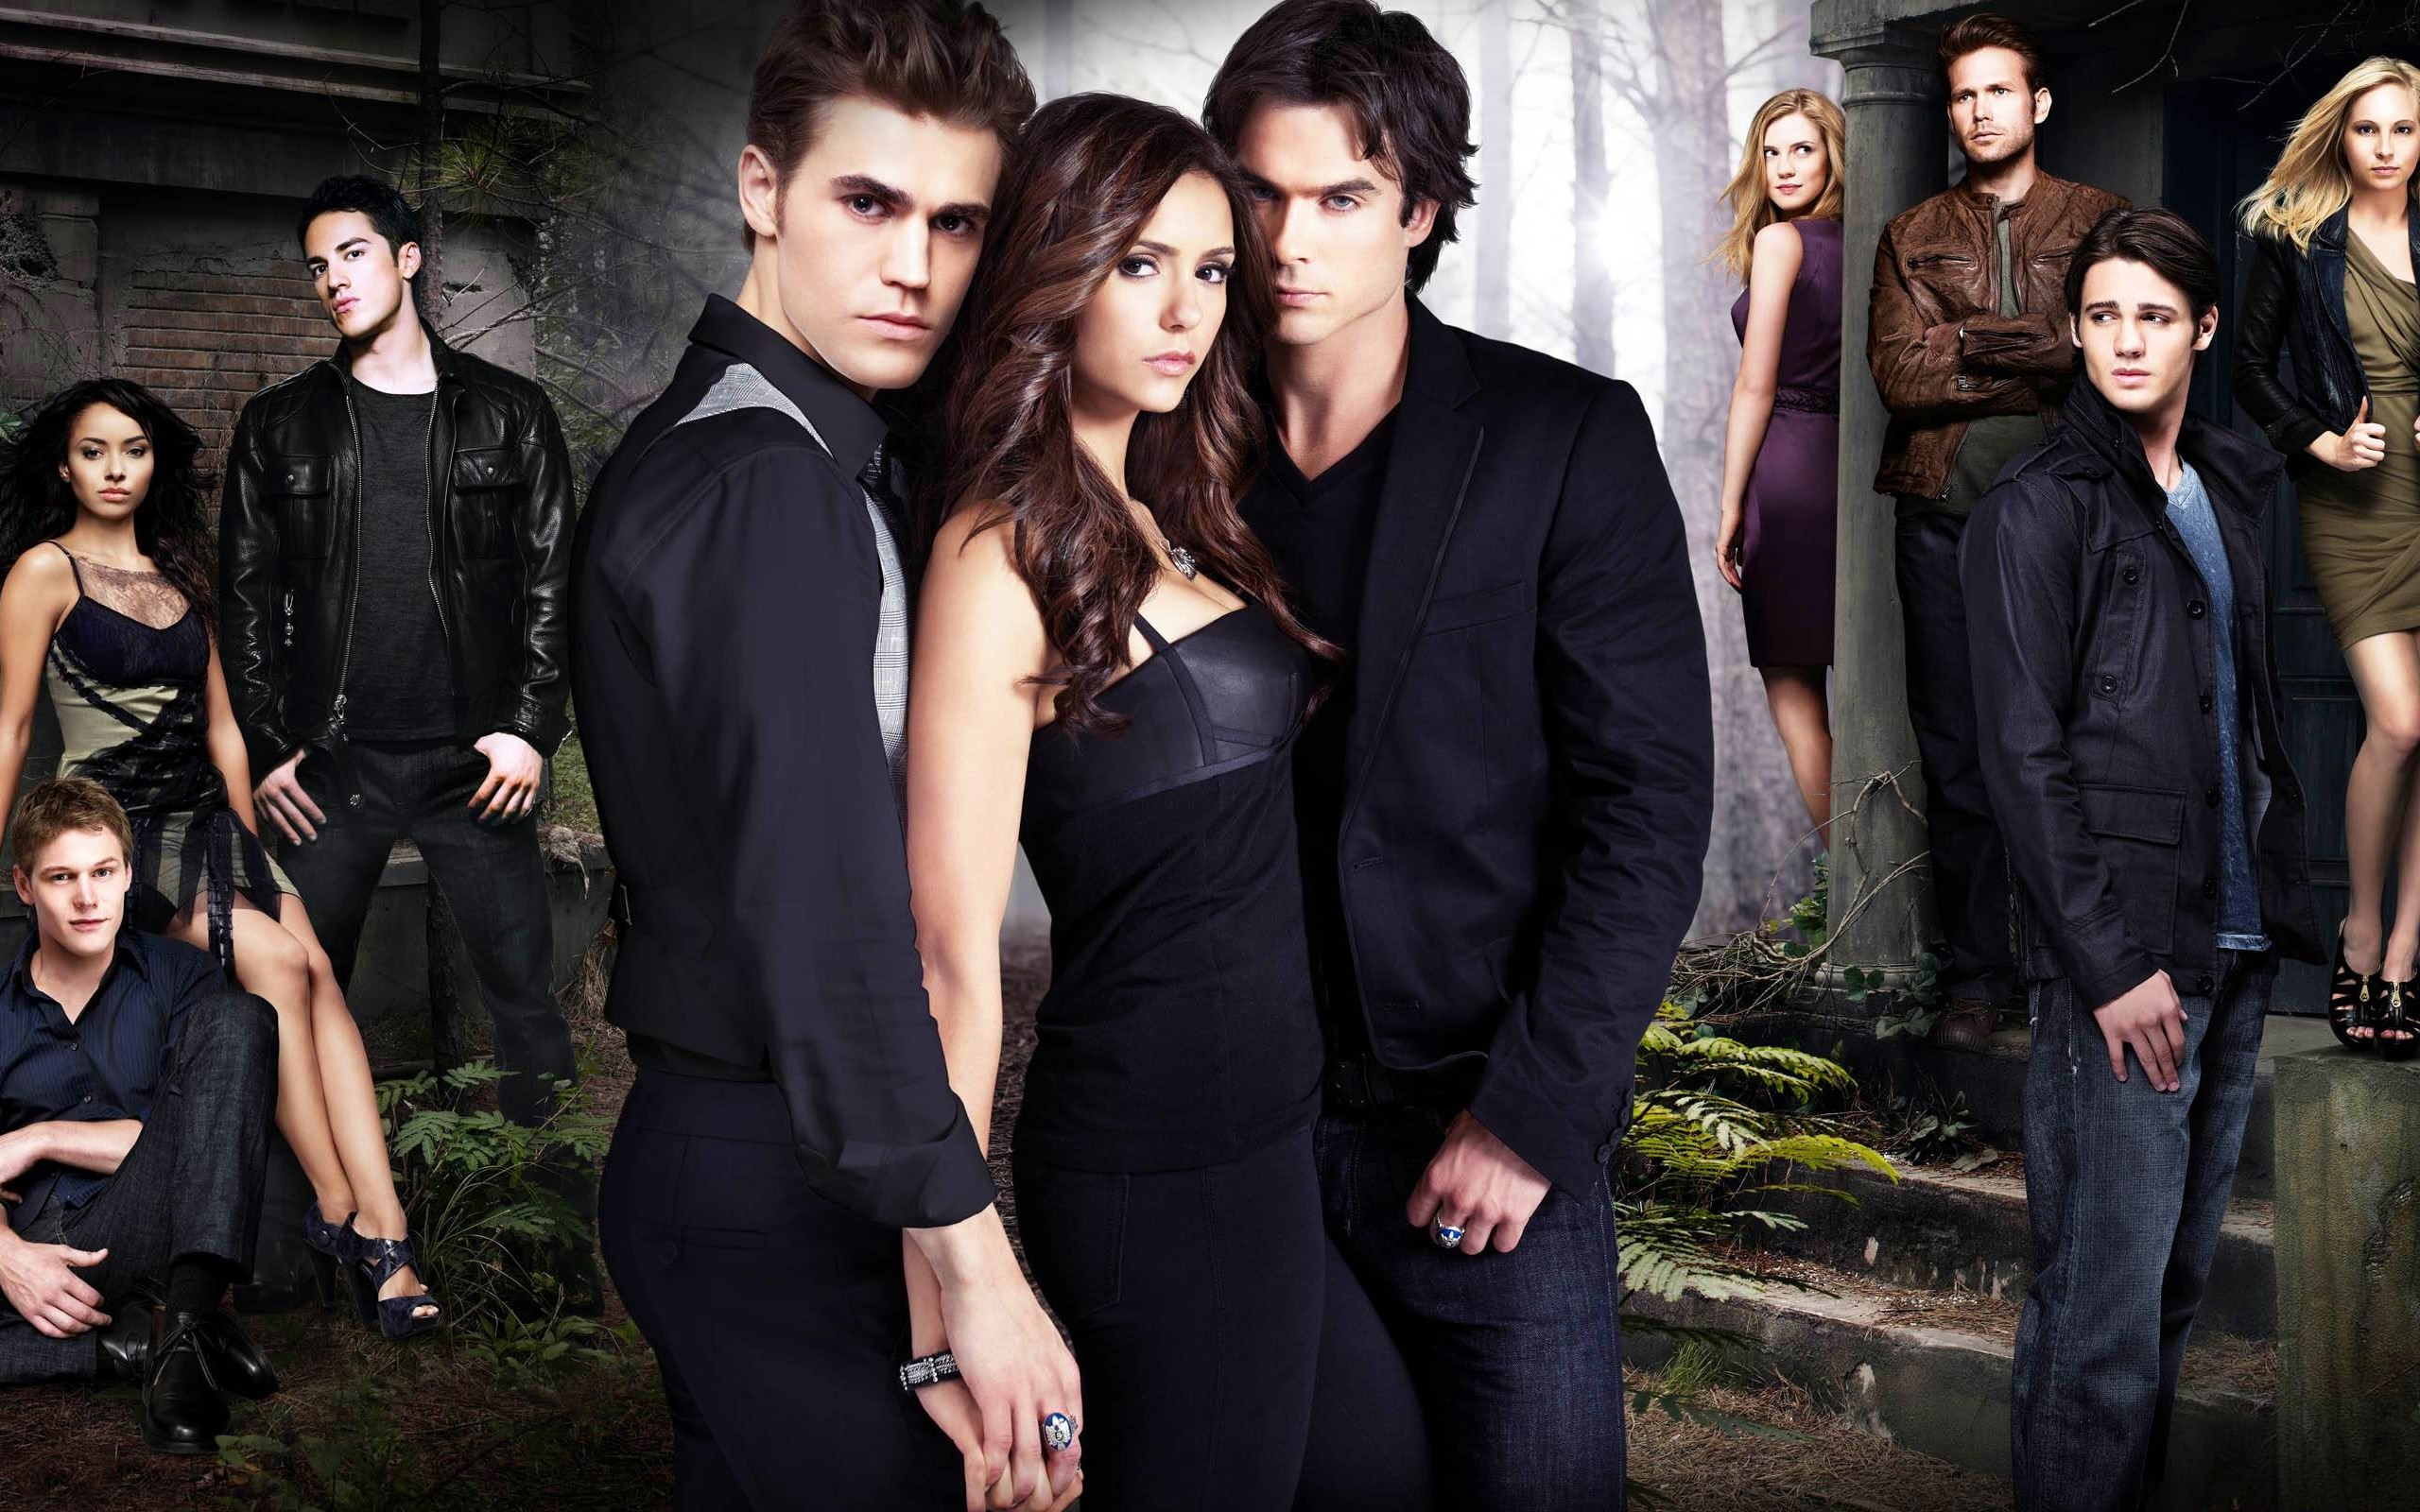 The Vampire Diaries HD Wallpapers #12 - 2560x1600